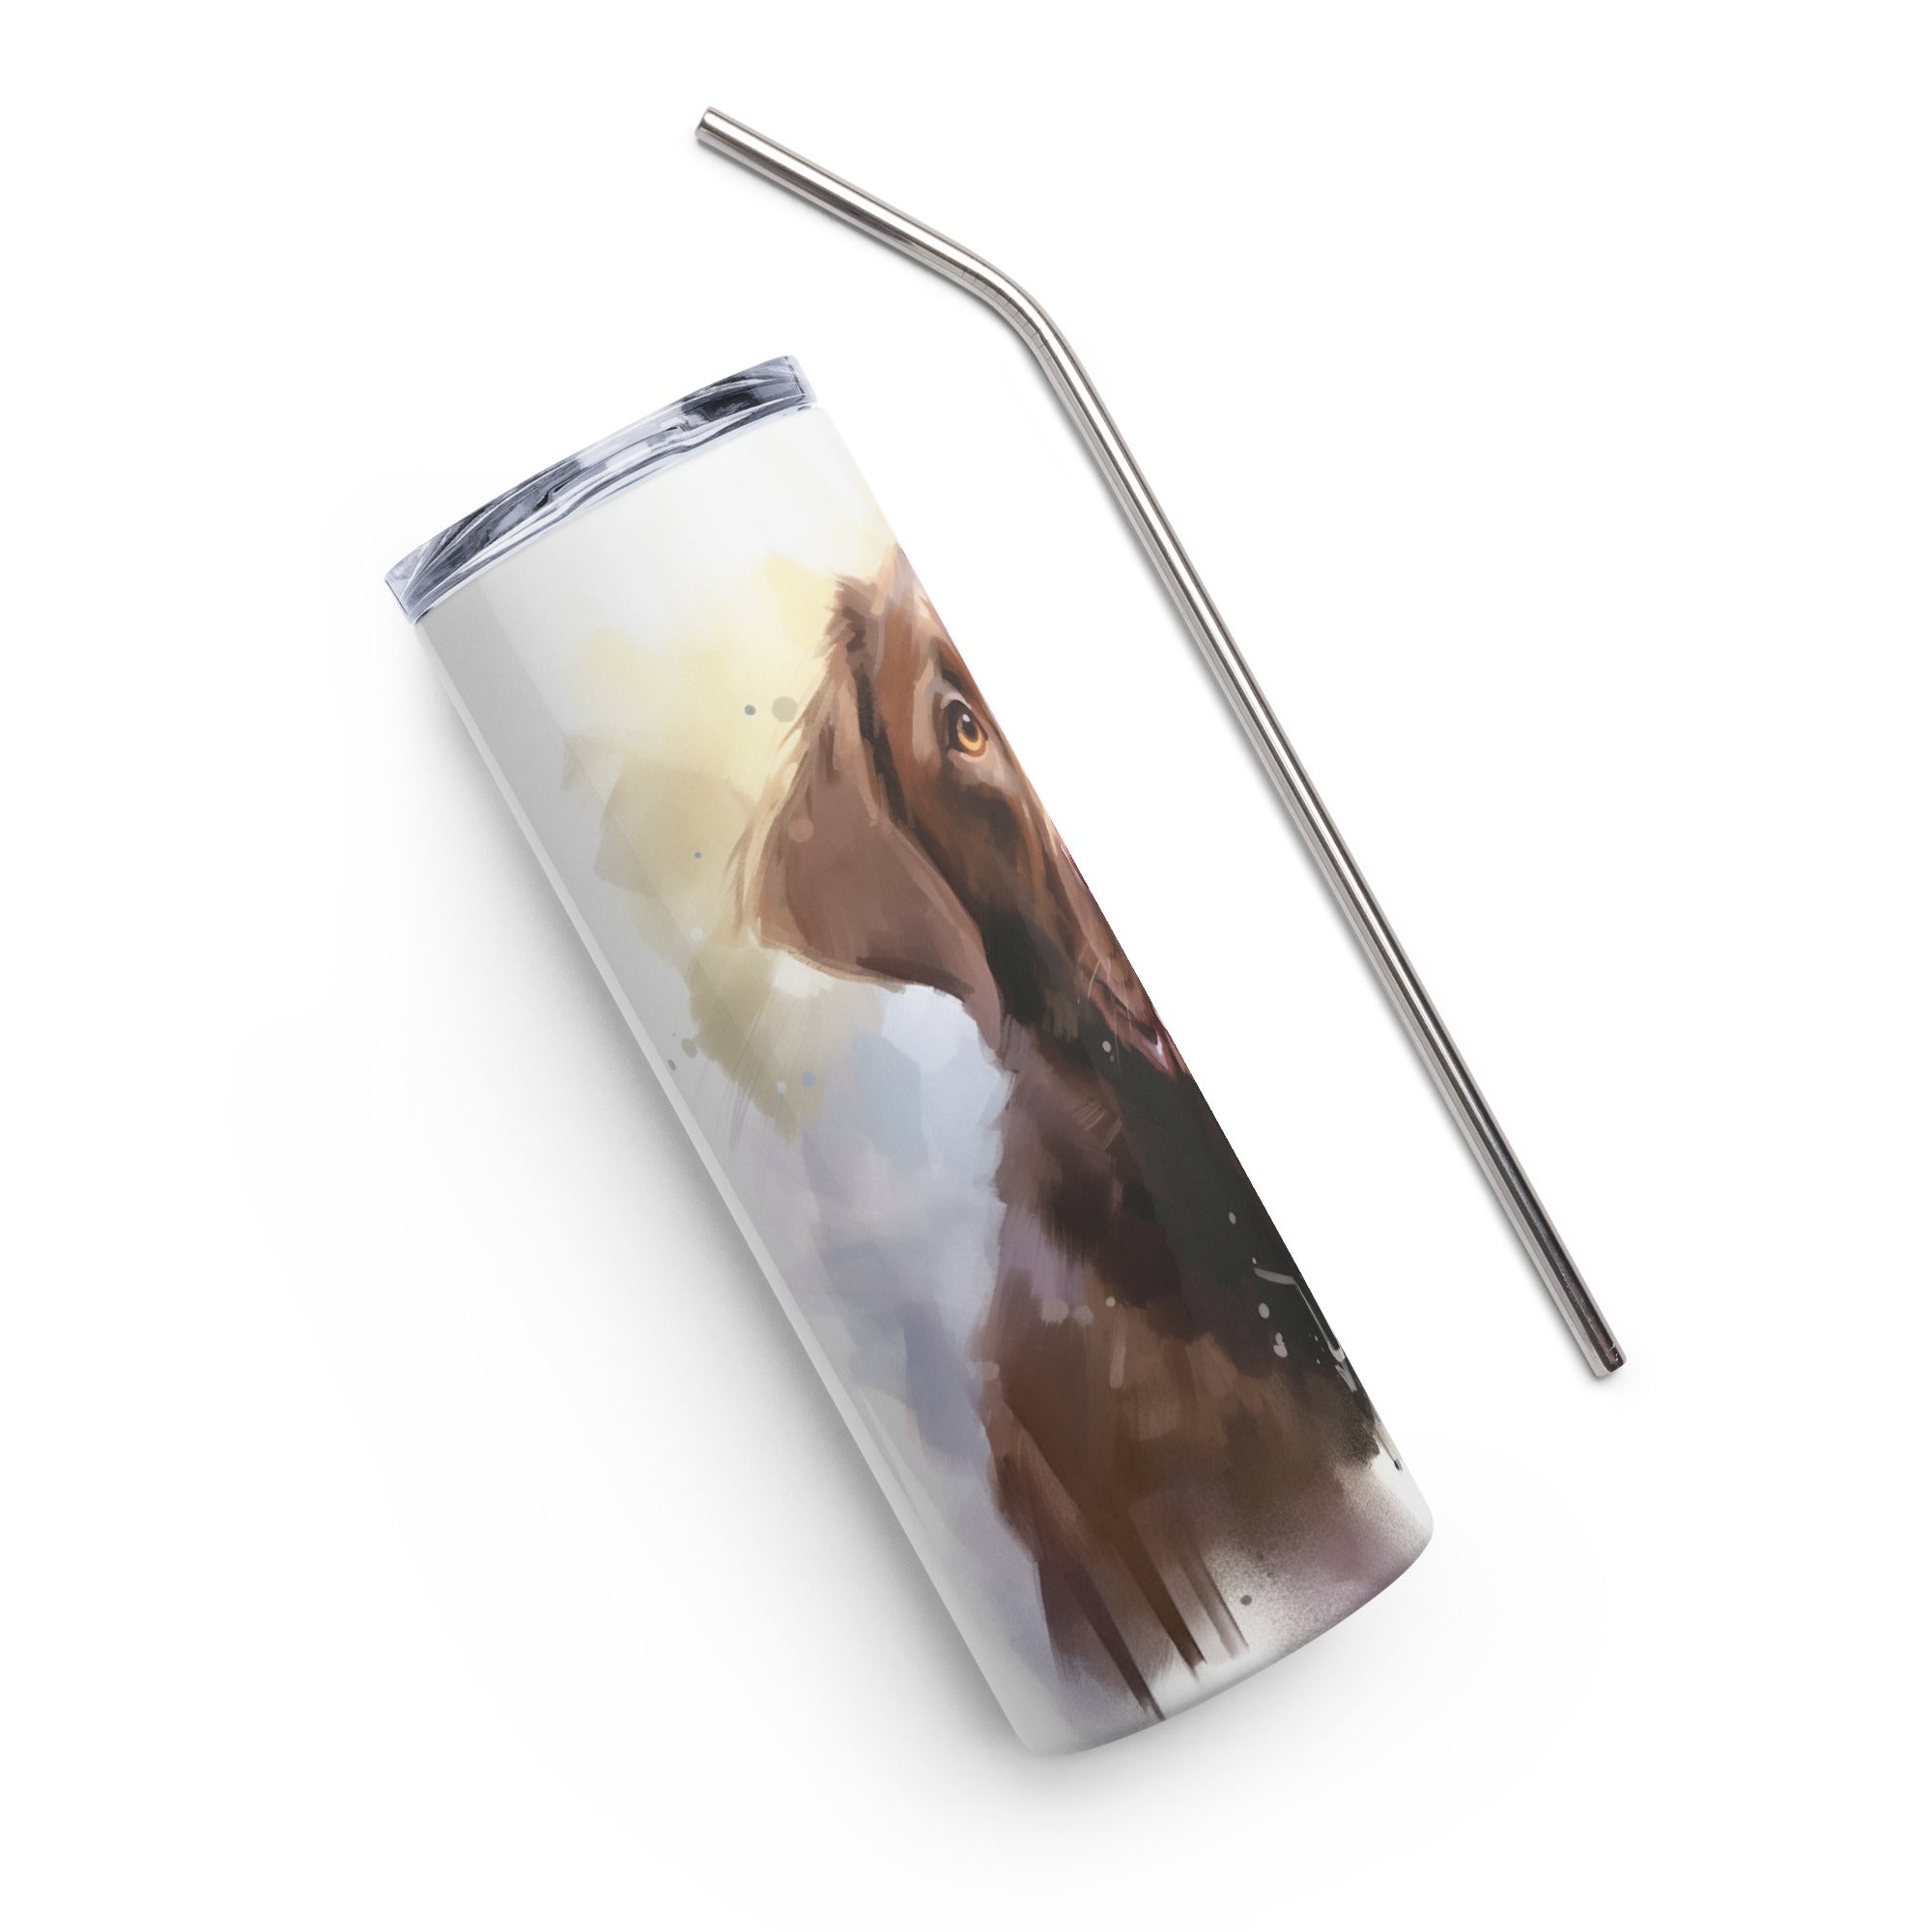 Stainless steel tumbler, Labrador, Gift, Travel, Hot, Cold,